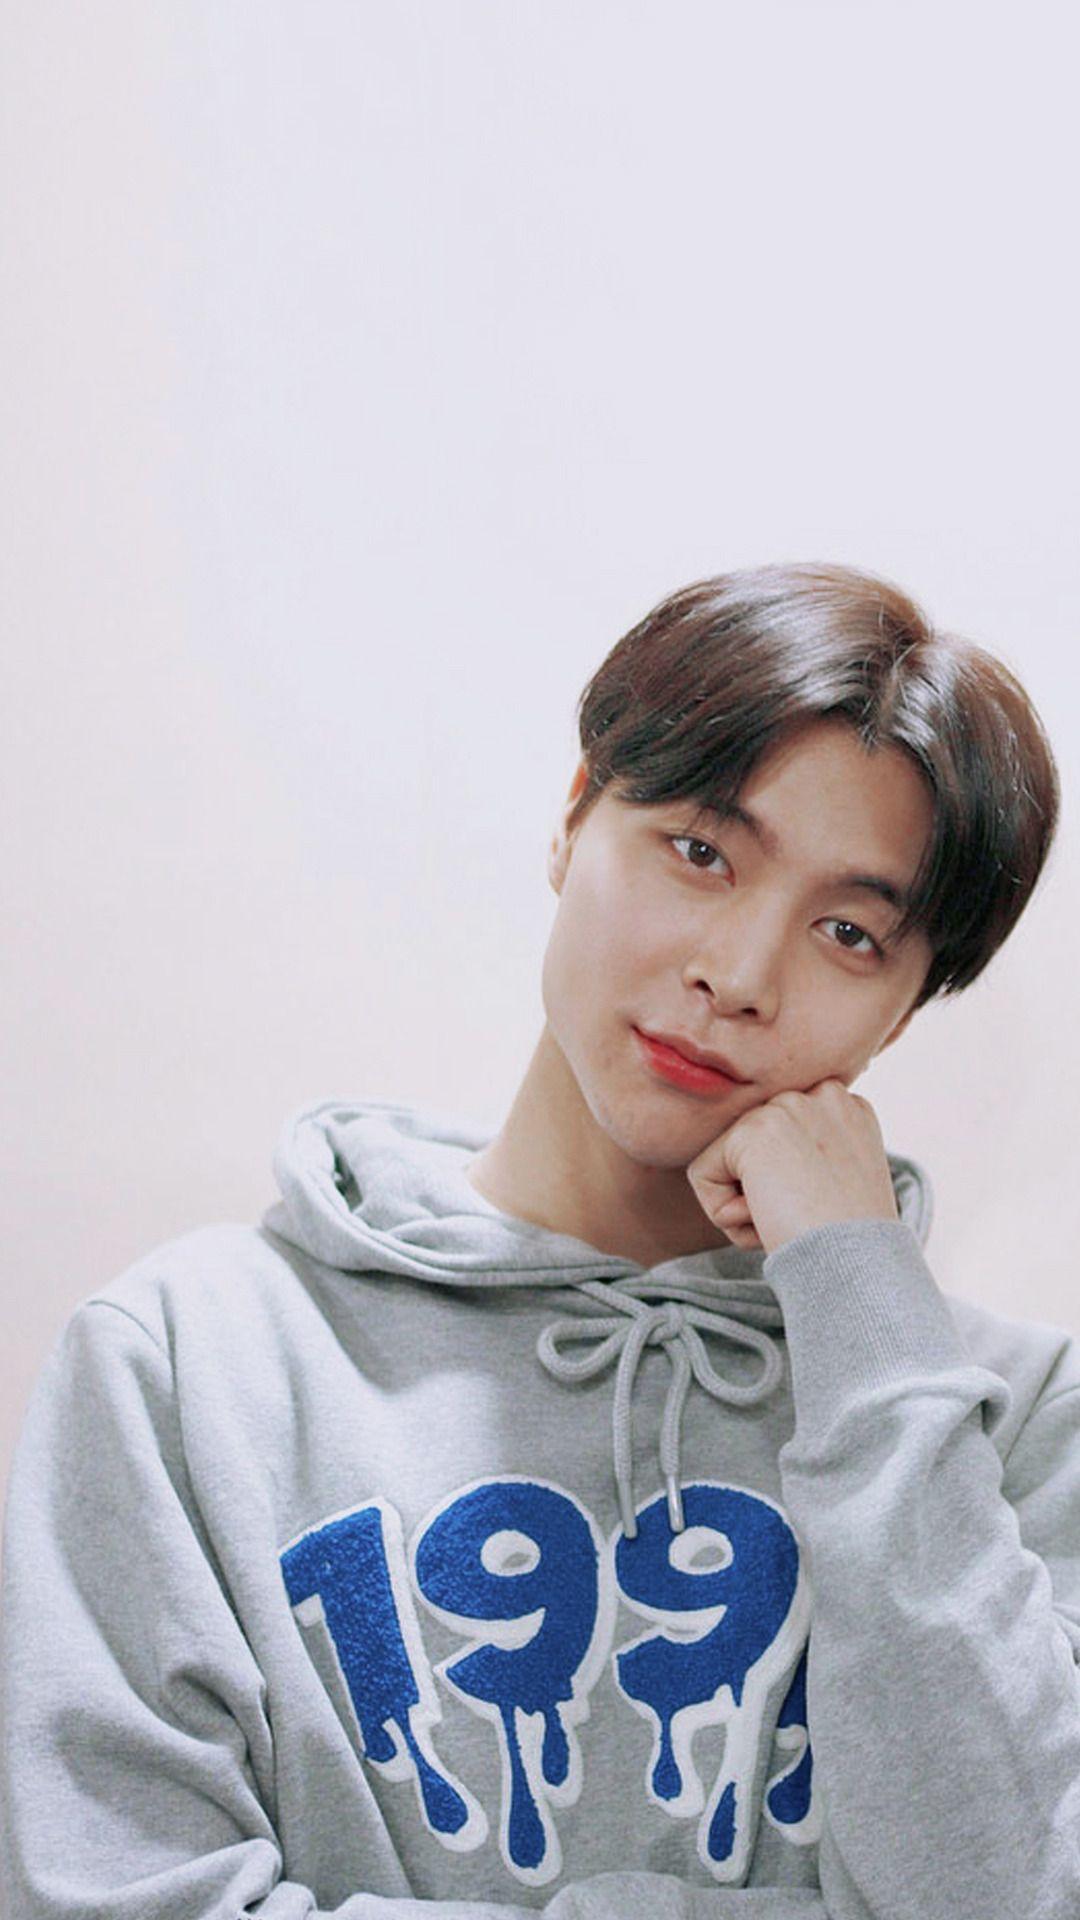 Johnny NCT Wallpaper Free Johnny NCT Background